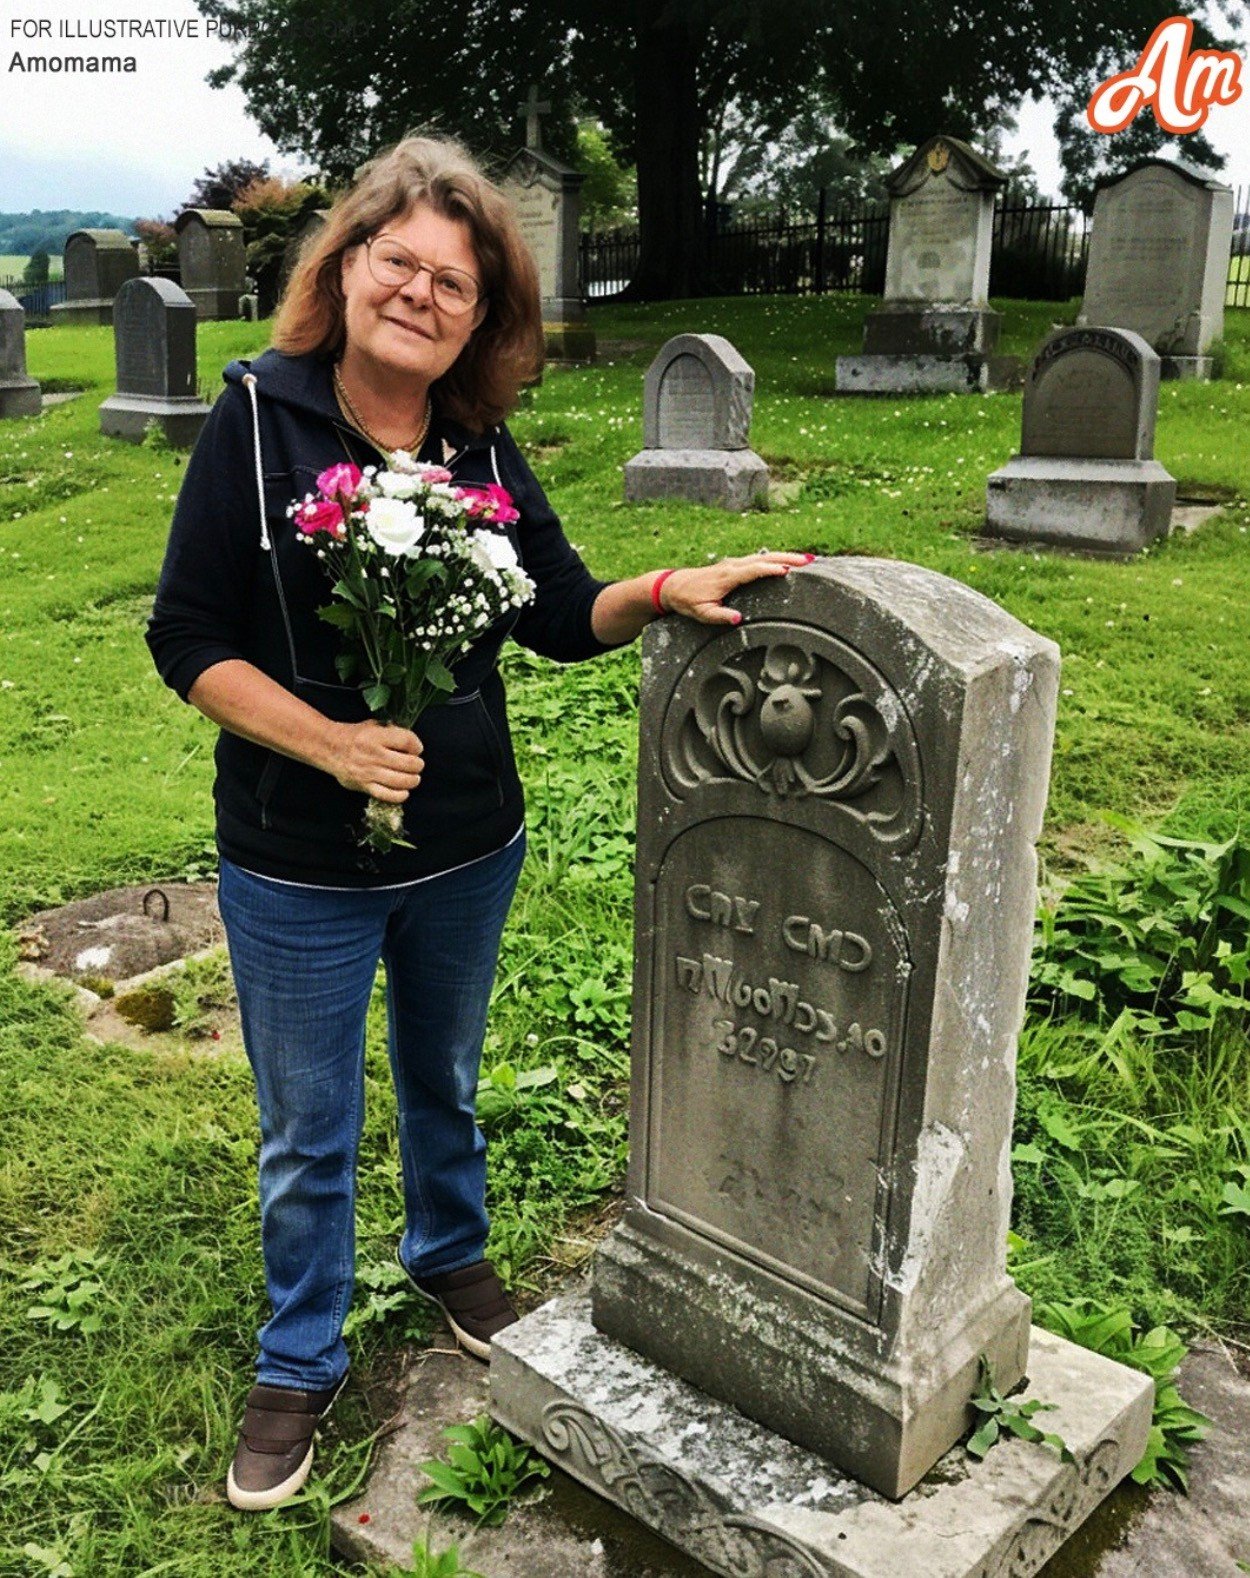 Lady Extends Invitation to Gentleman She Encountered Online to Visit Her Abode, Only to Discover His Picture at a Graveyard Prior to His Arrival — Tale of the Day